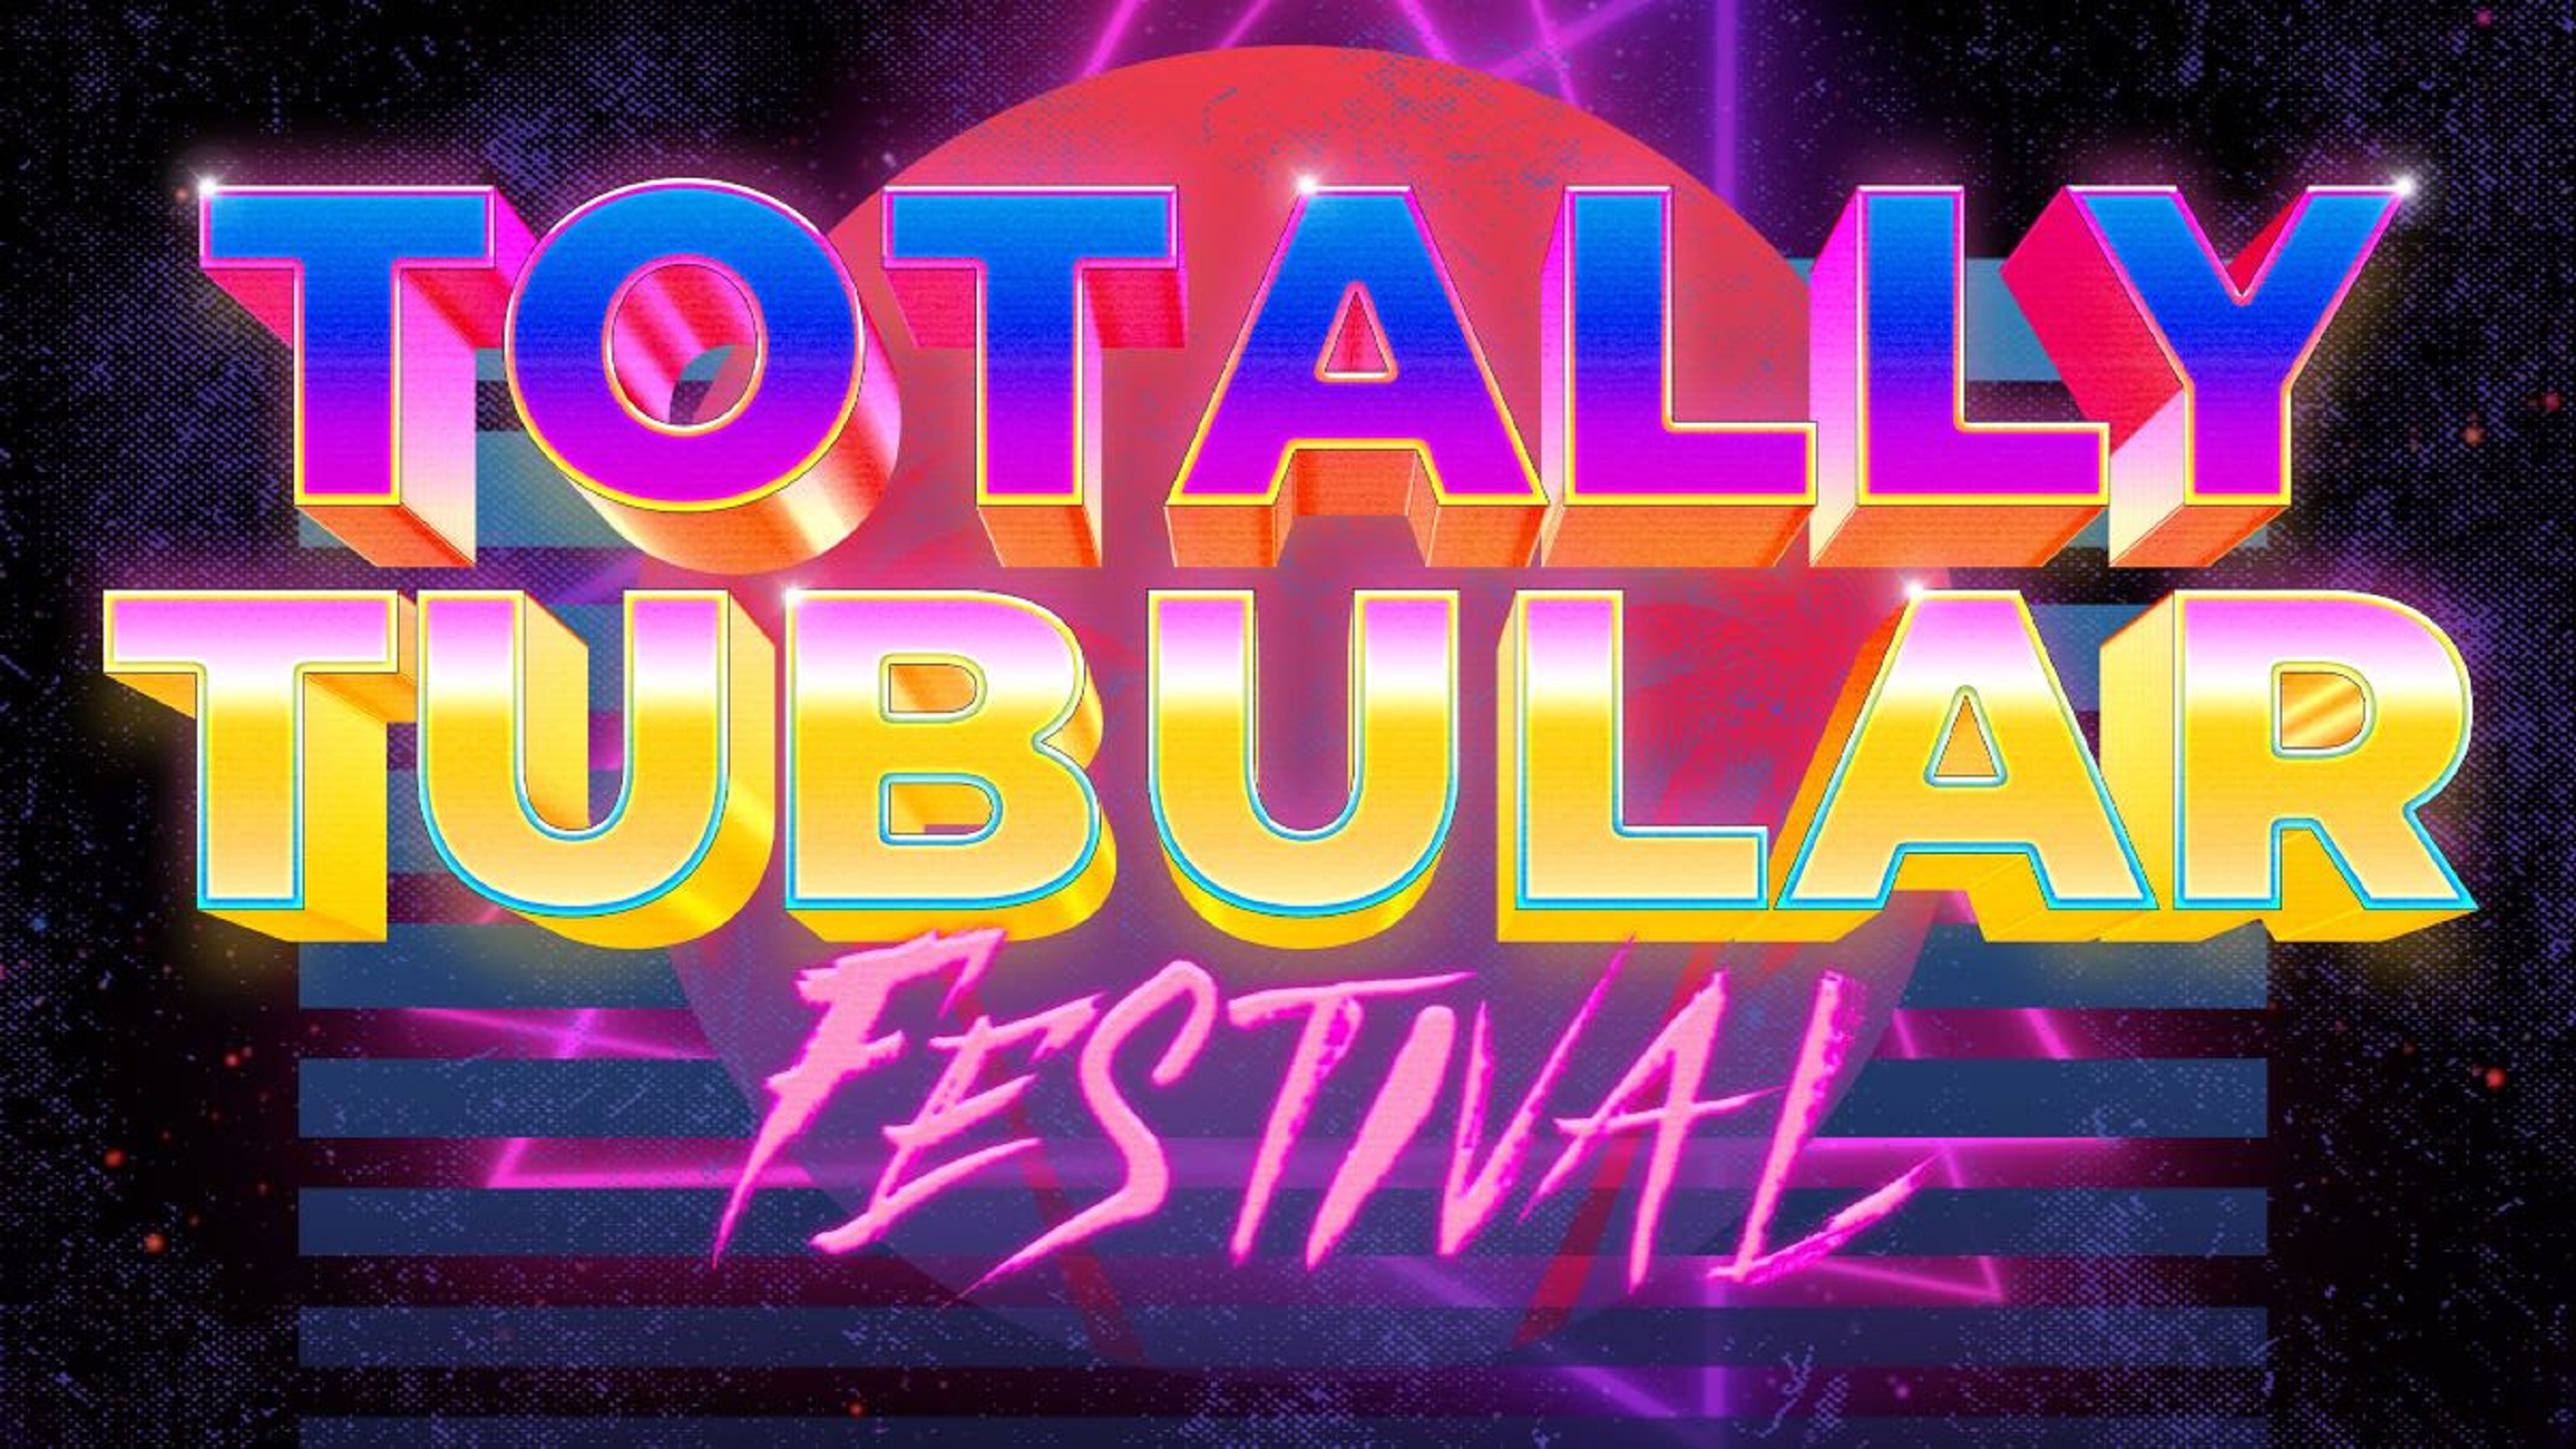 TOTALLY TUBULAR FESTIVAL: 80’s New Wave Tour Adding Five Markets Due To Demand